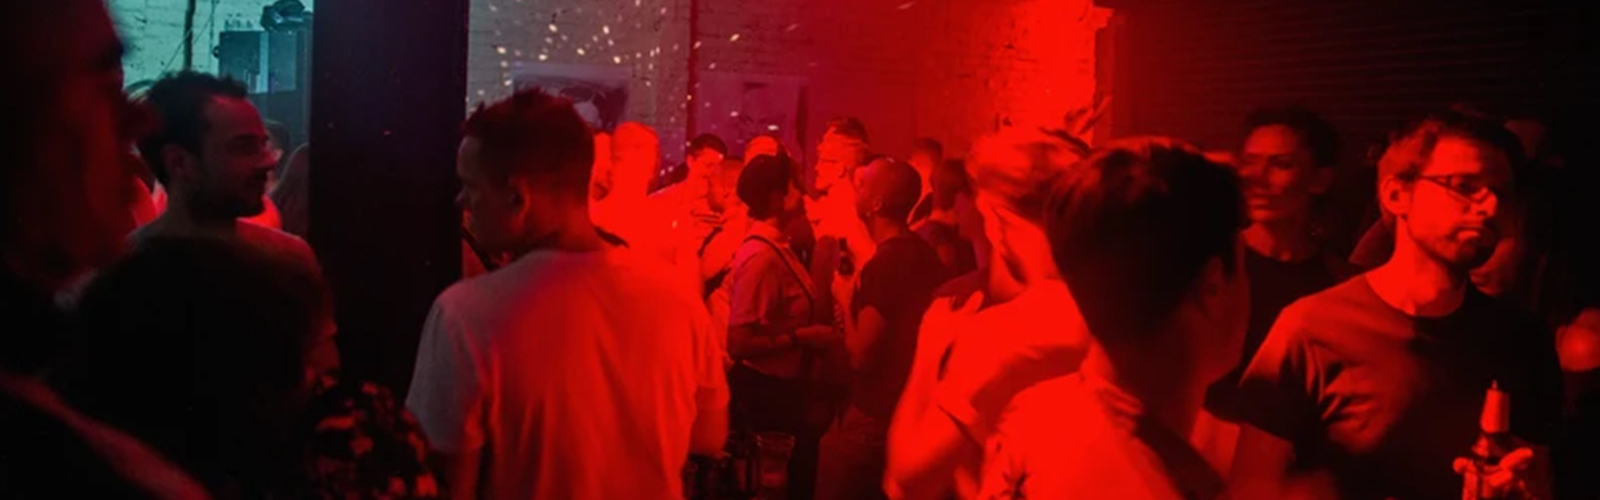 Photo of people inside a venue with red neon lighting